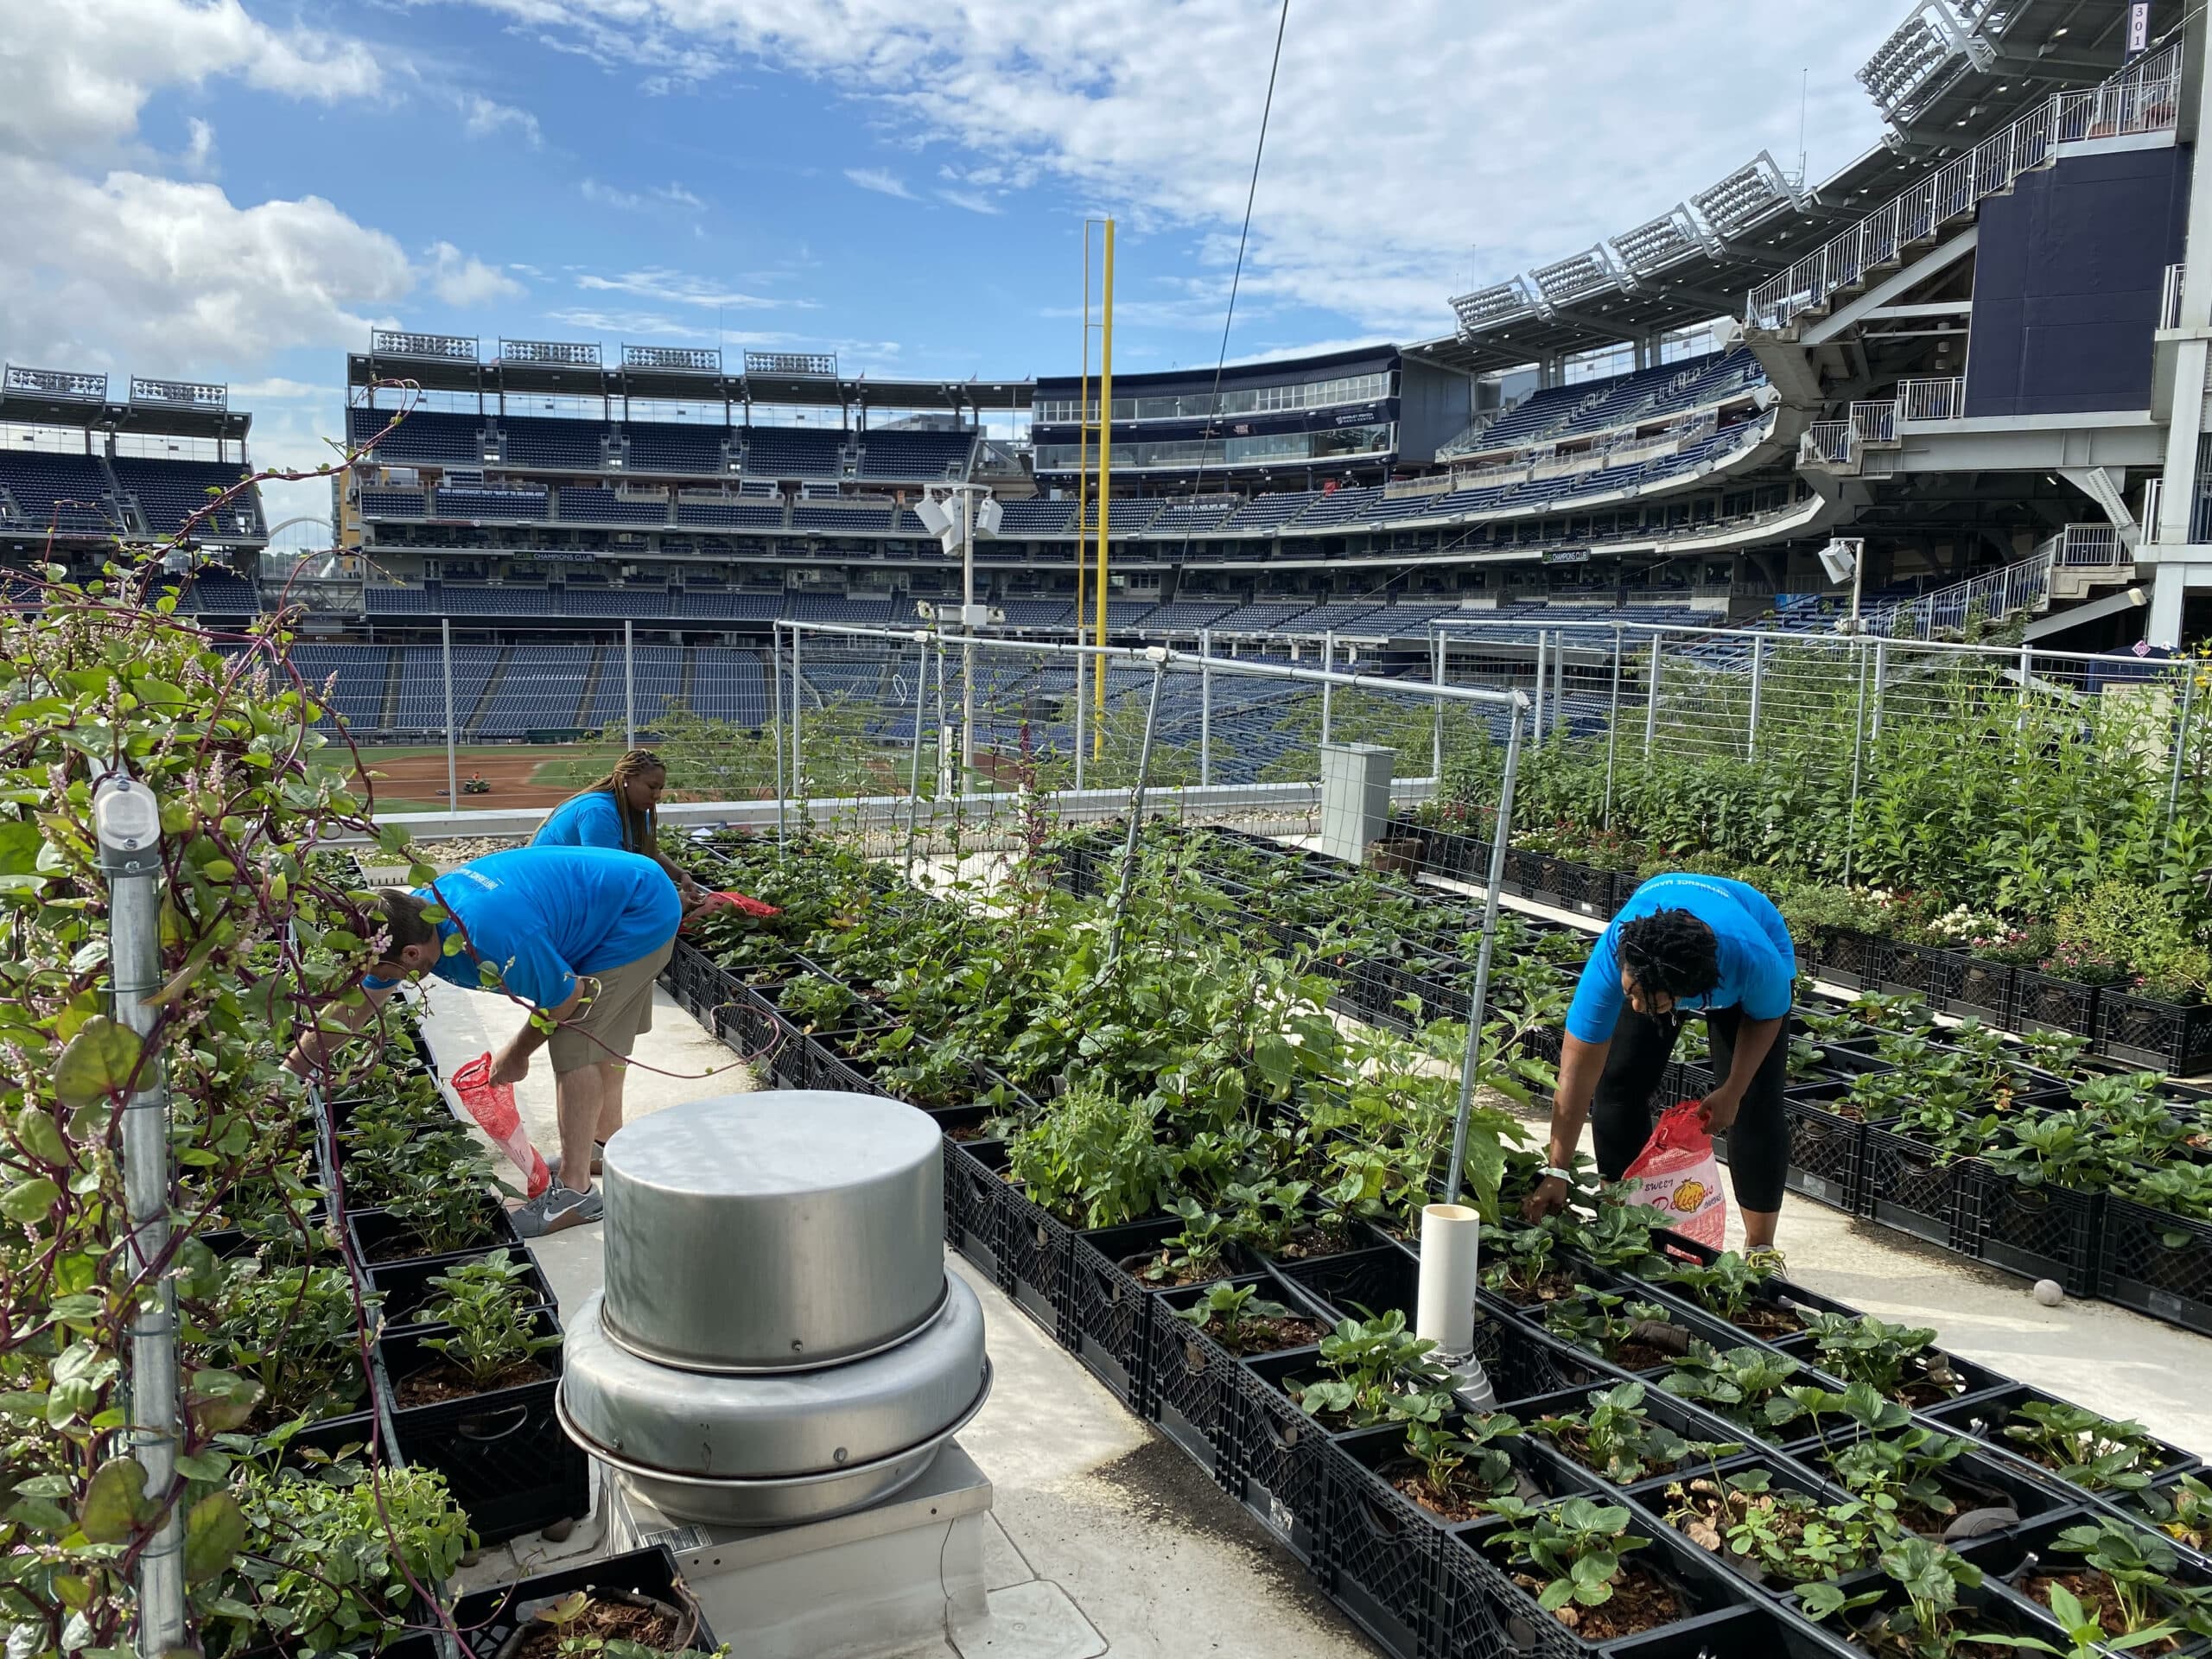 A group of people cultivating plots in Bridge Park for an urban garden within a stadium.